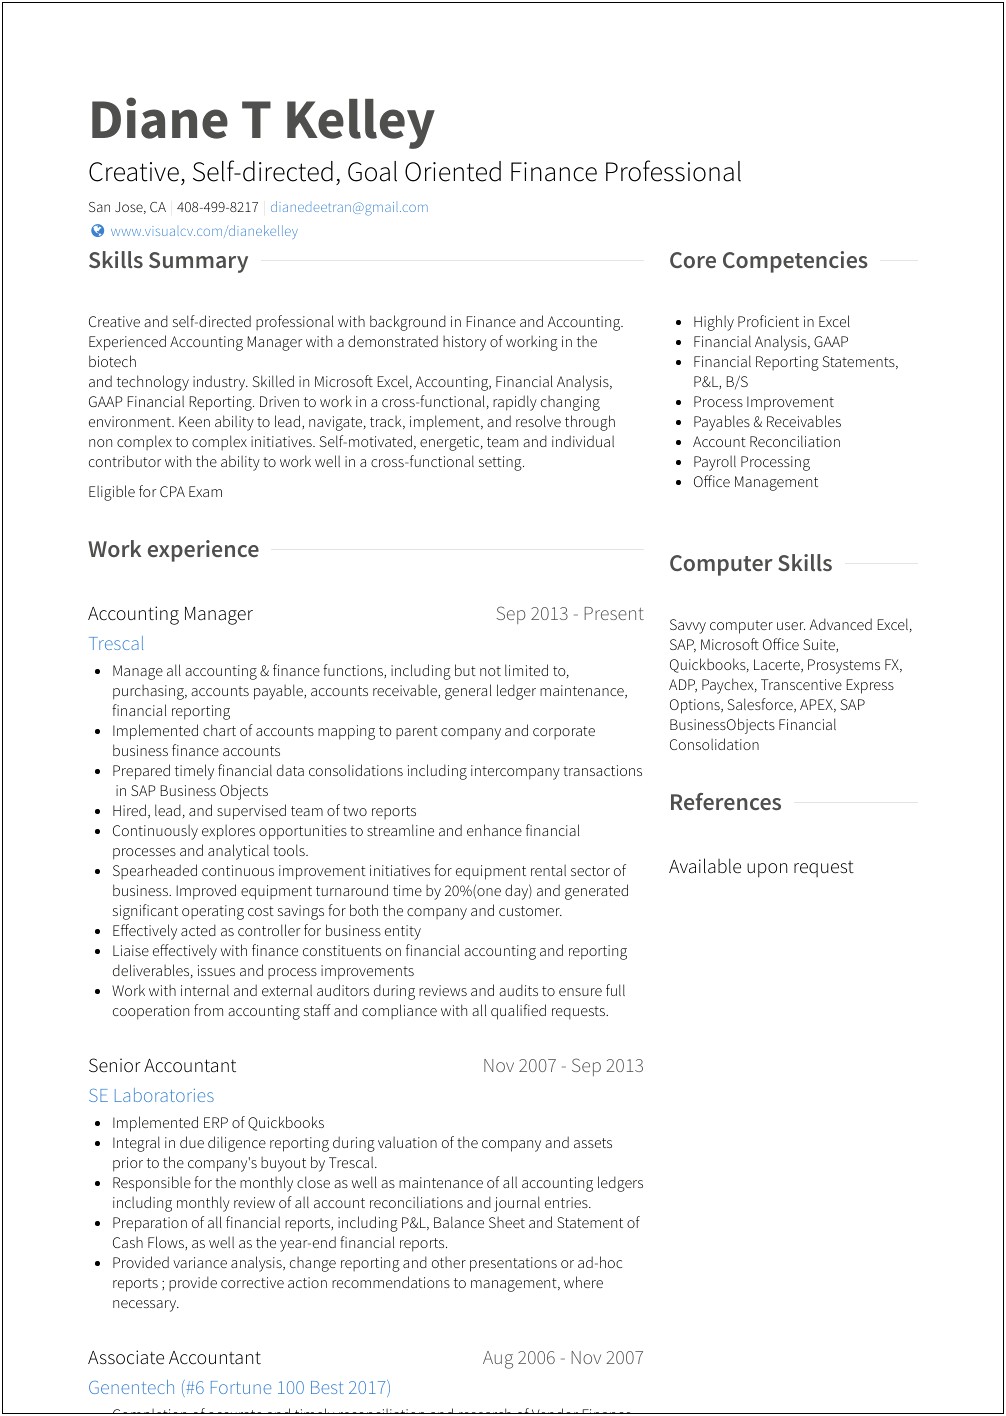 Skills Section Of Resume Accountant